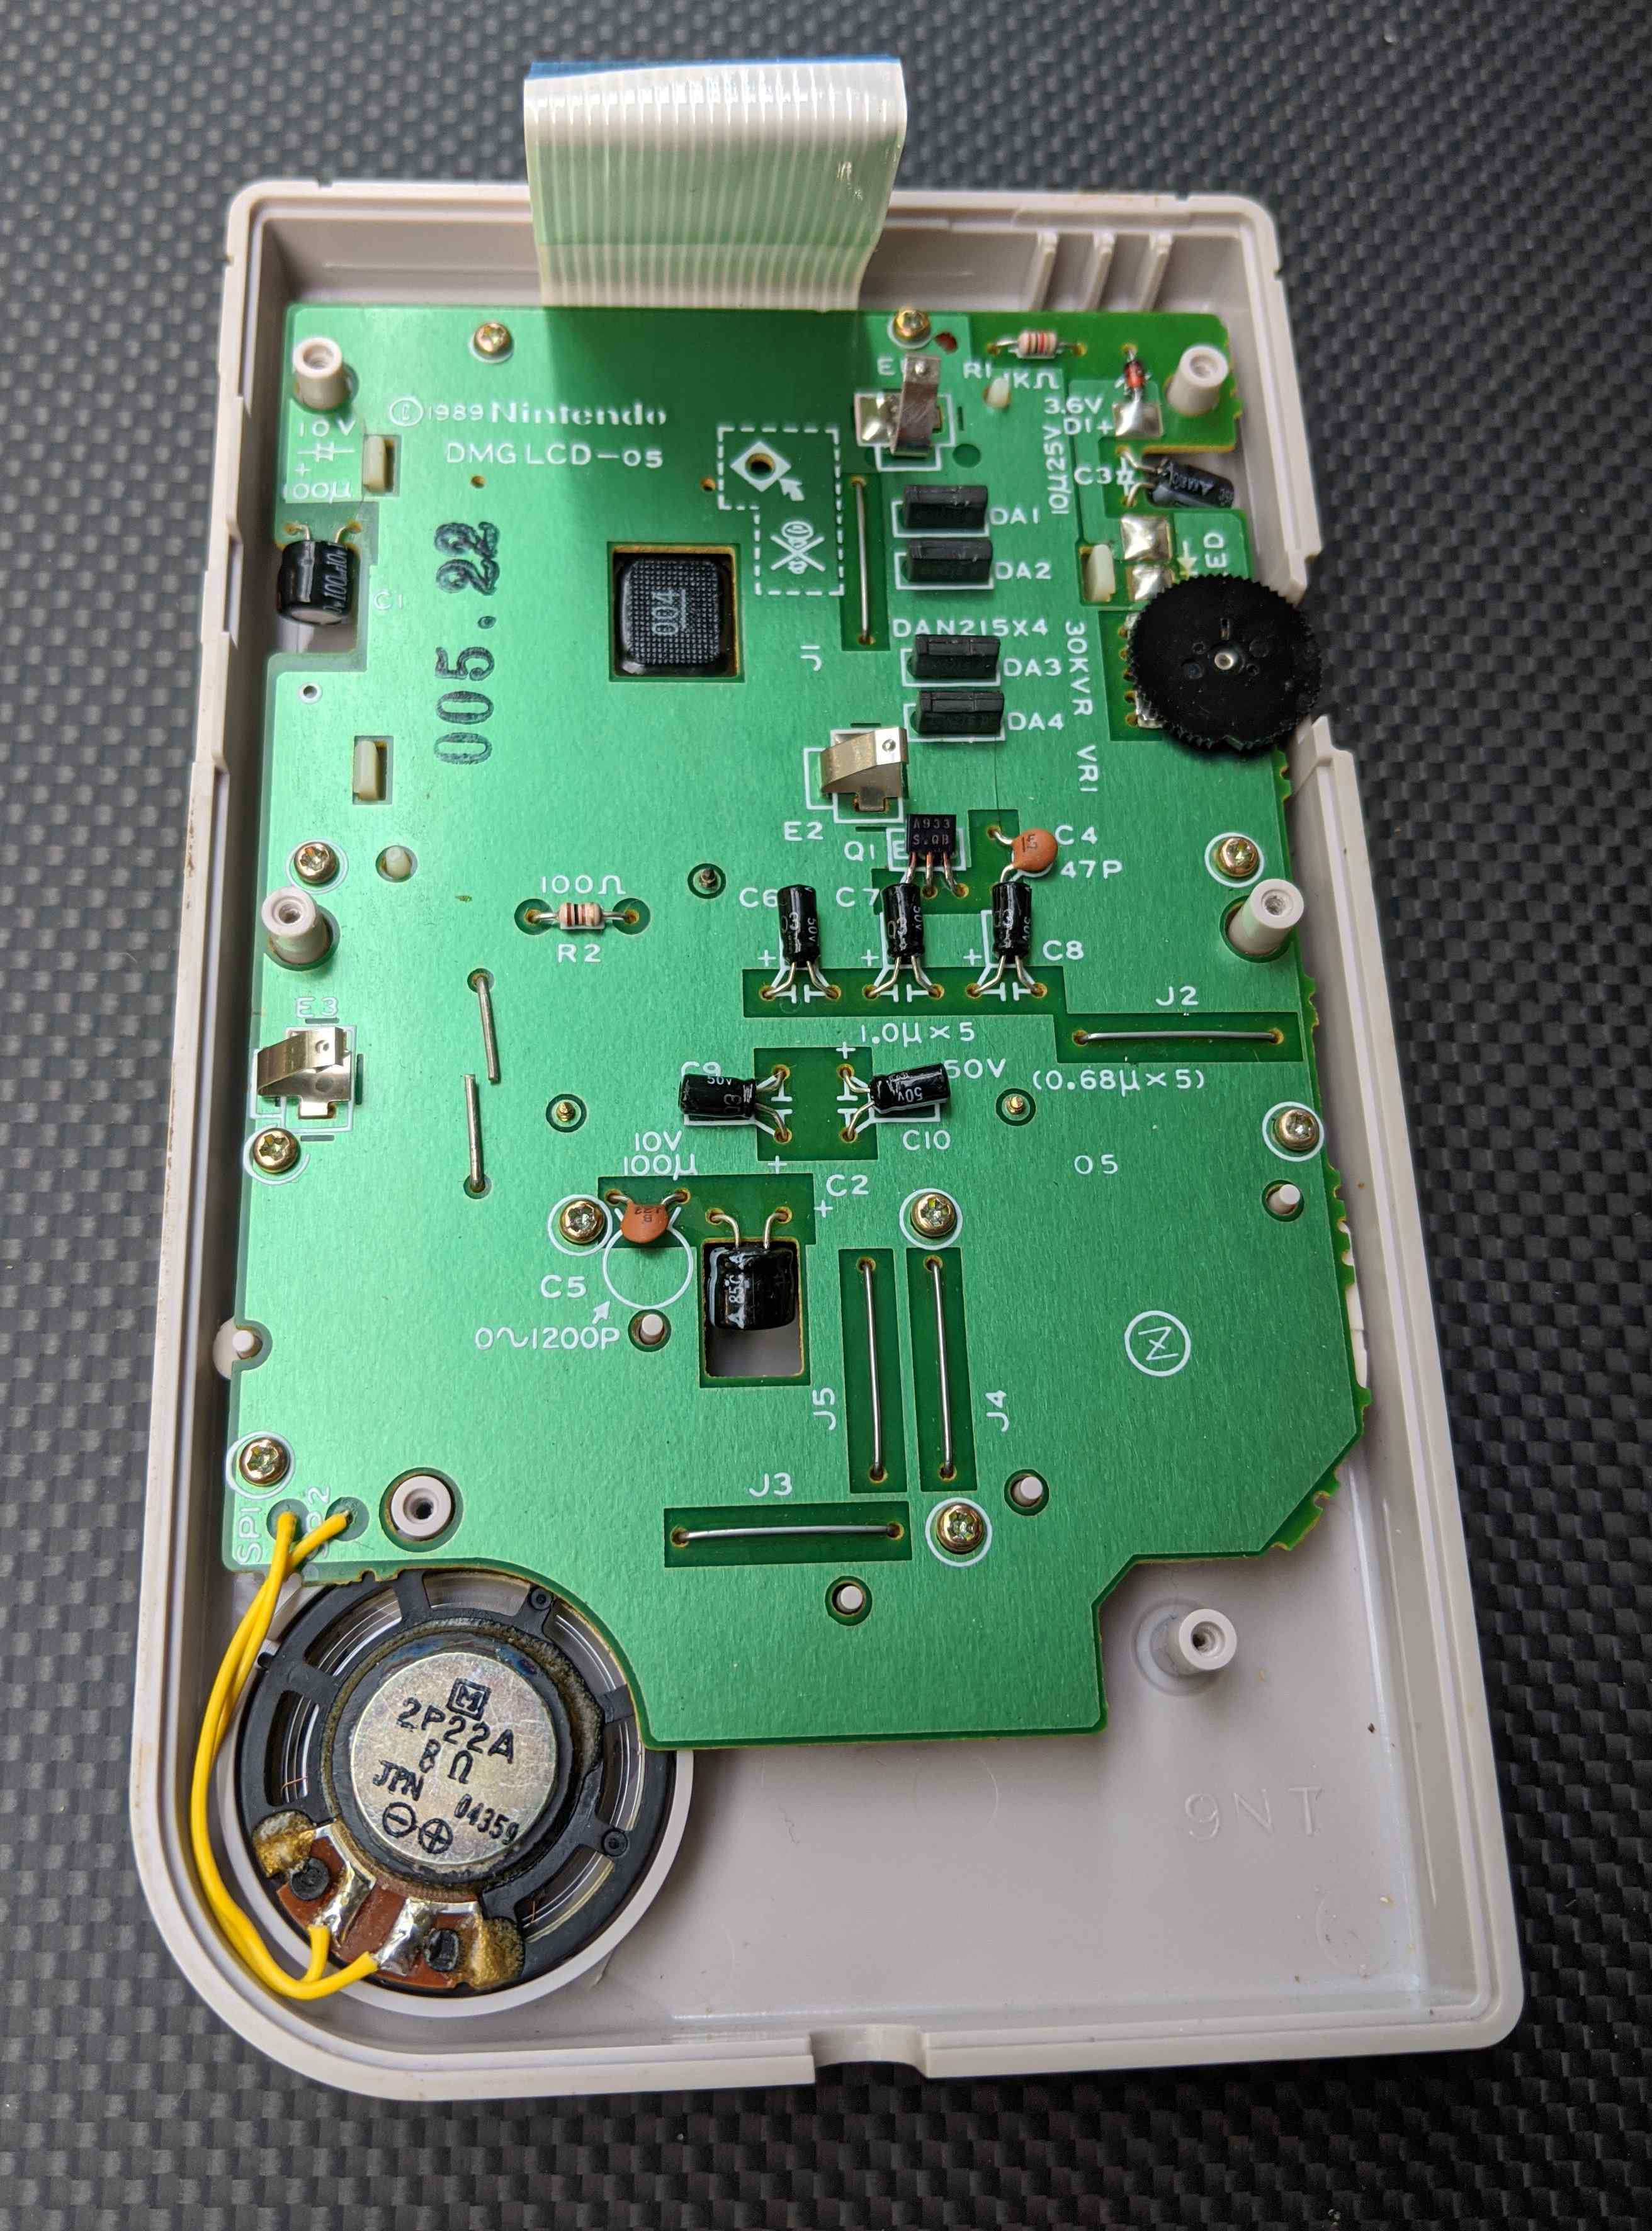 Back of the screen PCB while mounted in the case